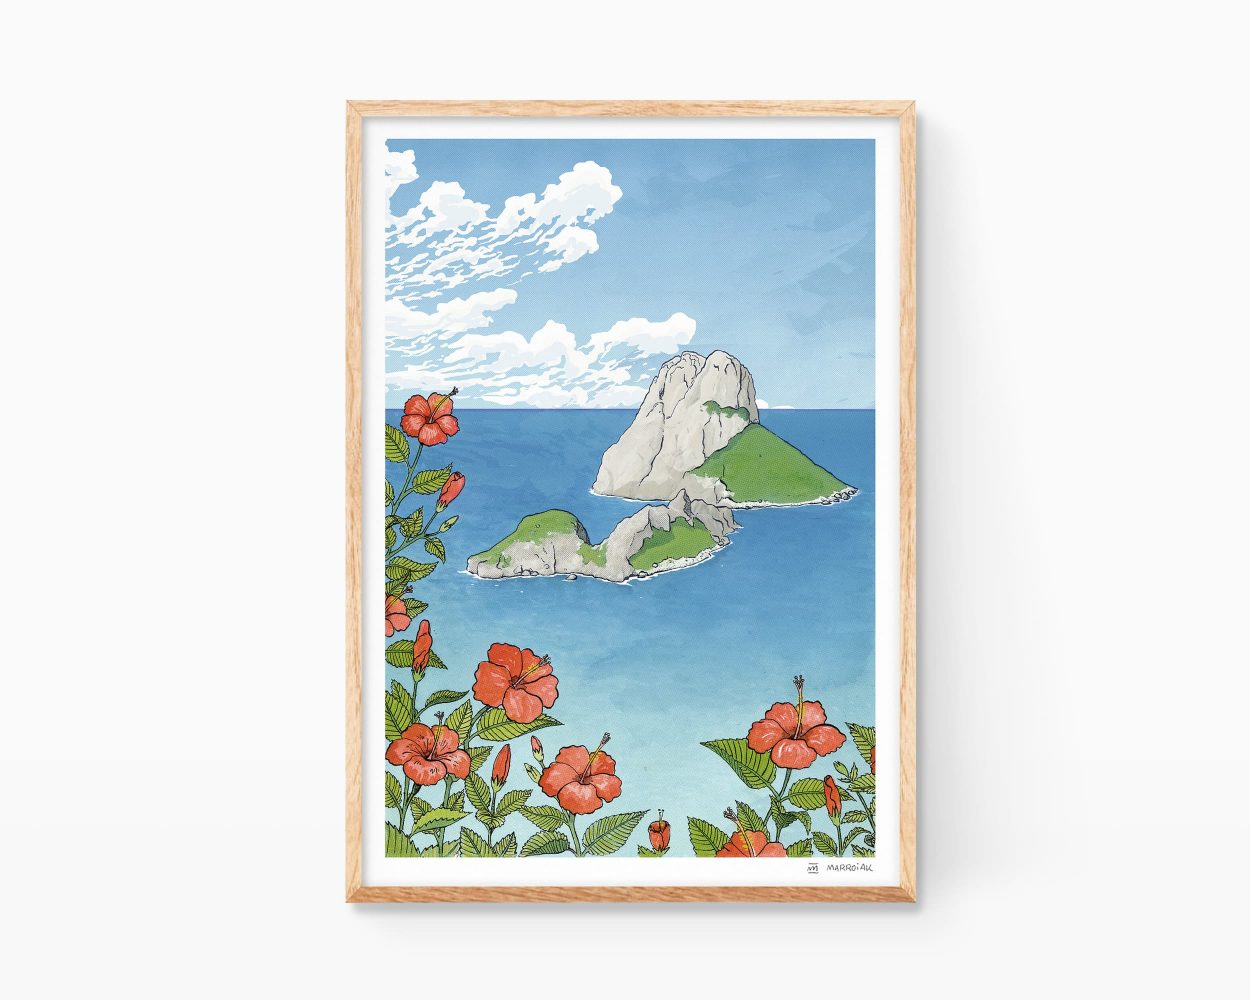 Ibiza Art Prints: Es Vedrà illustration and Ibiscus flowers. Travel watercolor poster of Spain and Balearic Islands.